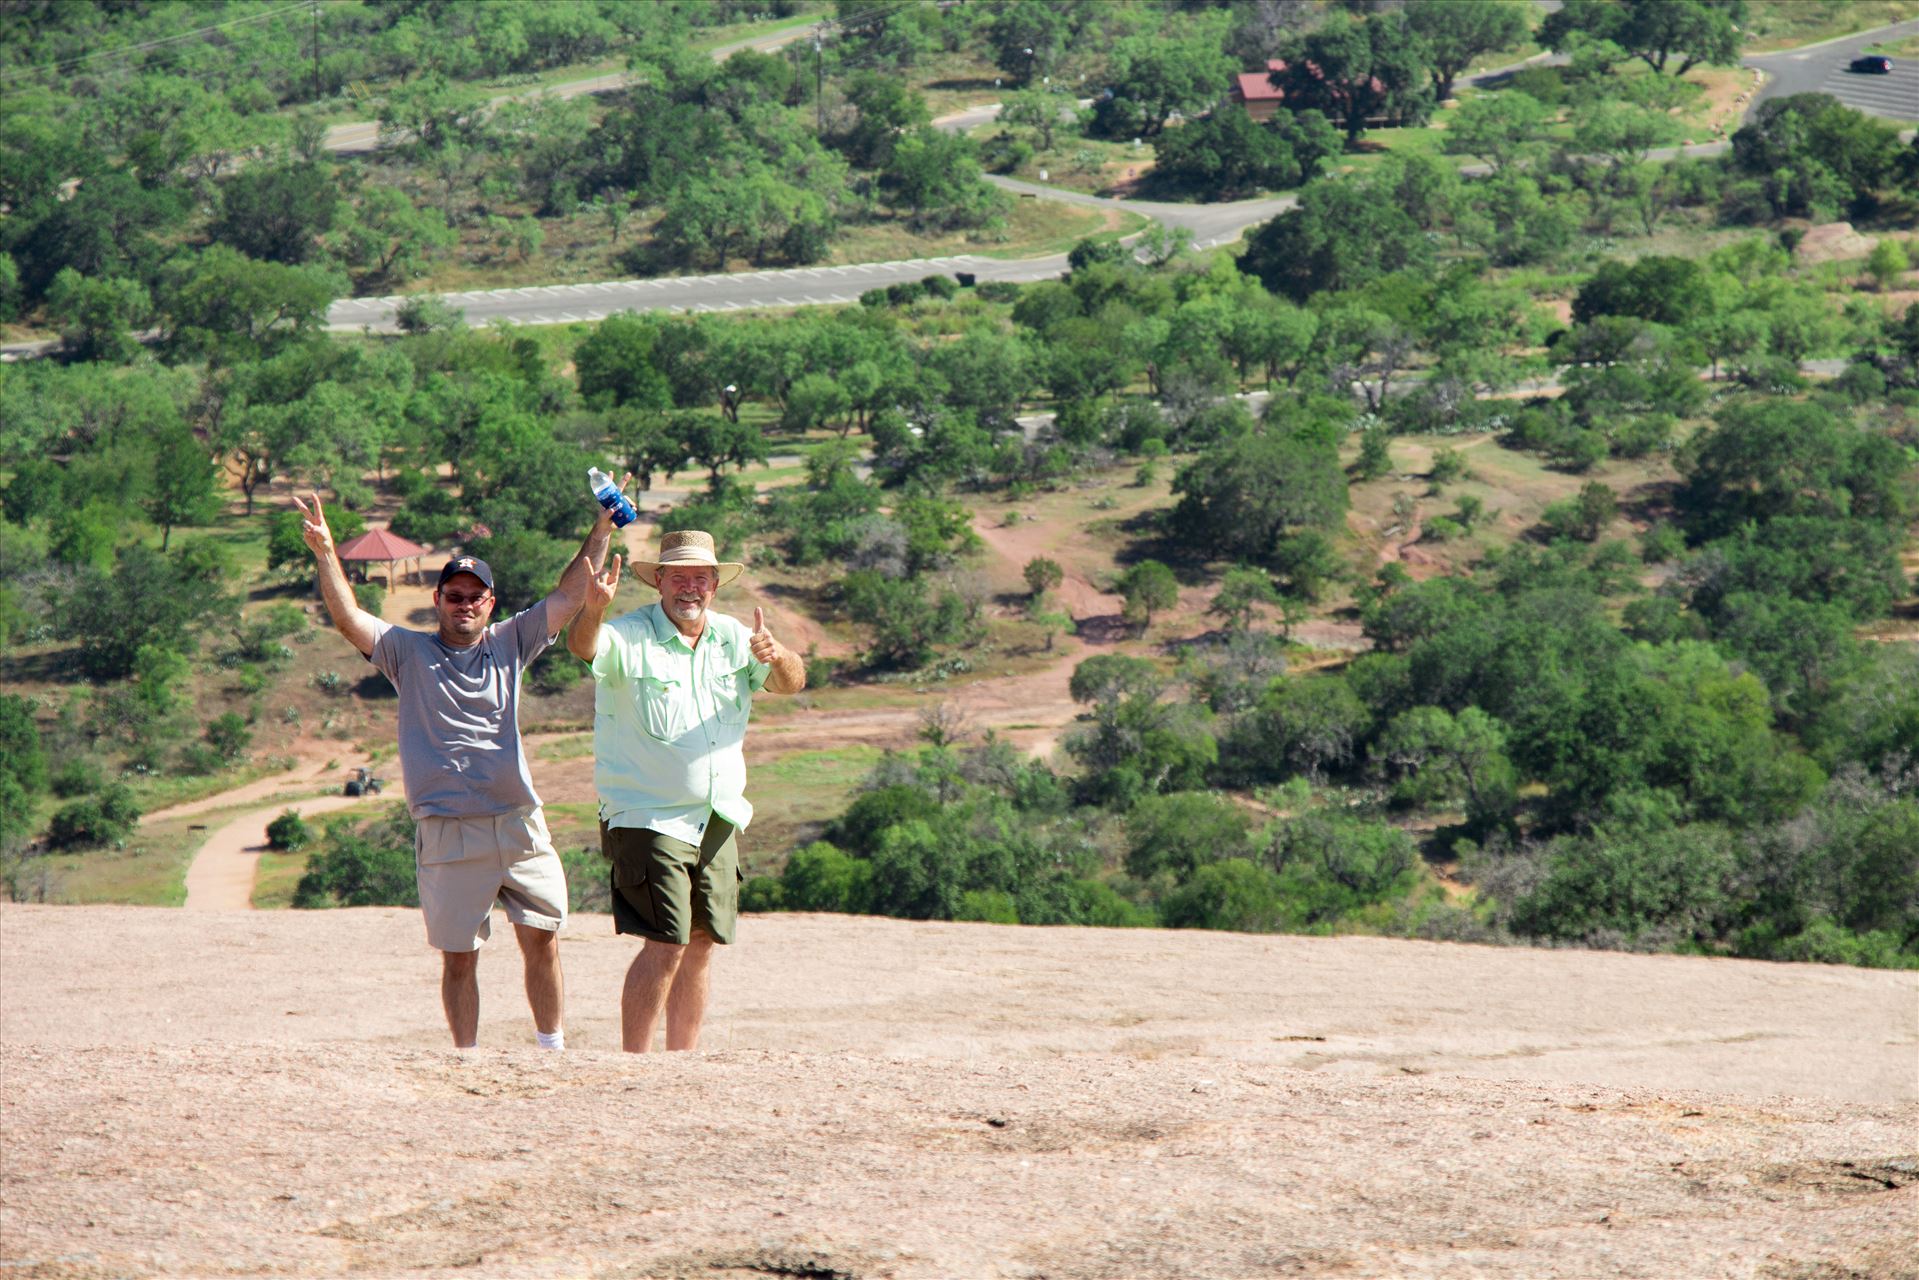 20130723-Enchanted Rock-DSLR-037.jpg -  by Charles Smith Photography